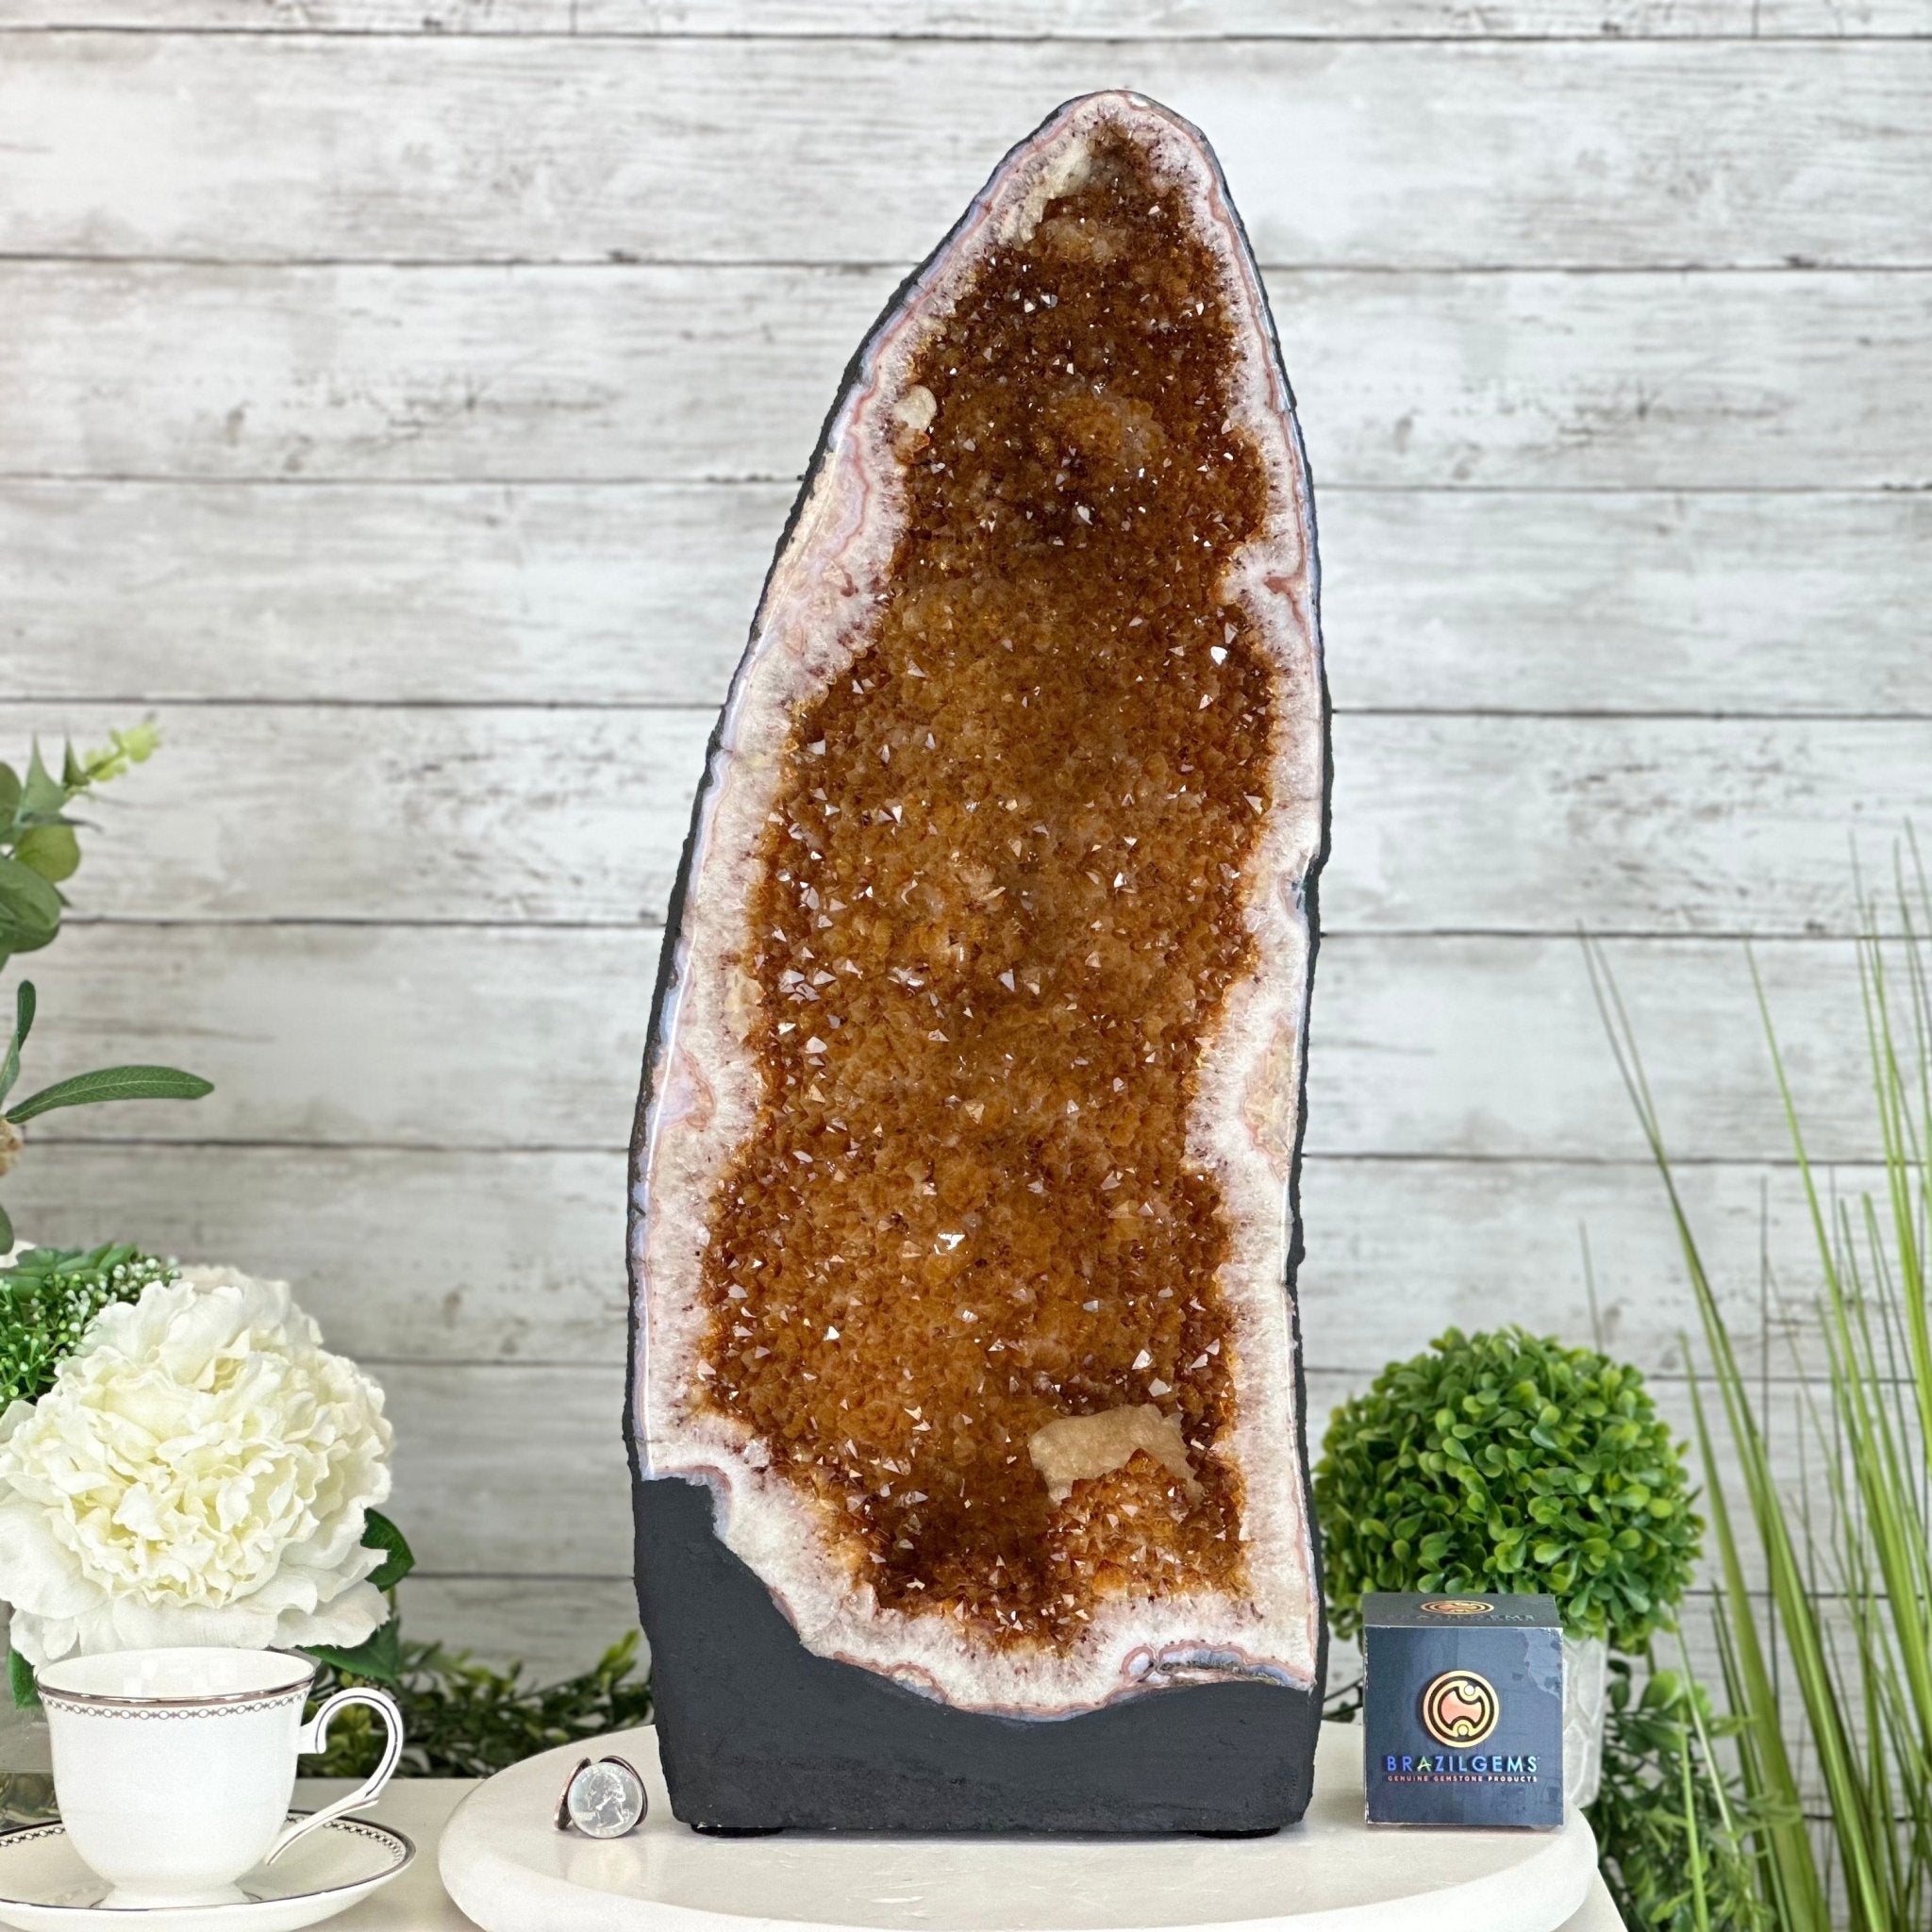 Extra Plus Quality Citrine Cathedral, 35.1 lbs & 22" Tall #5603-0324 by Brazil Gems® - Brazil GemsBrazil GemsExtra Plus Quality Citrine Cathedral, 35.1 lbs & 22" Tall #5603-0324 by Brazil Gems®Cathedrals5603-0324